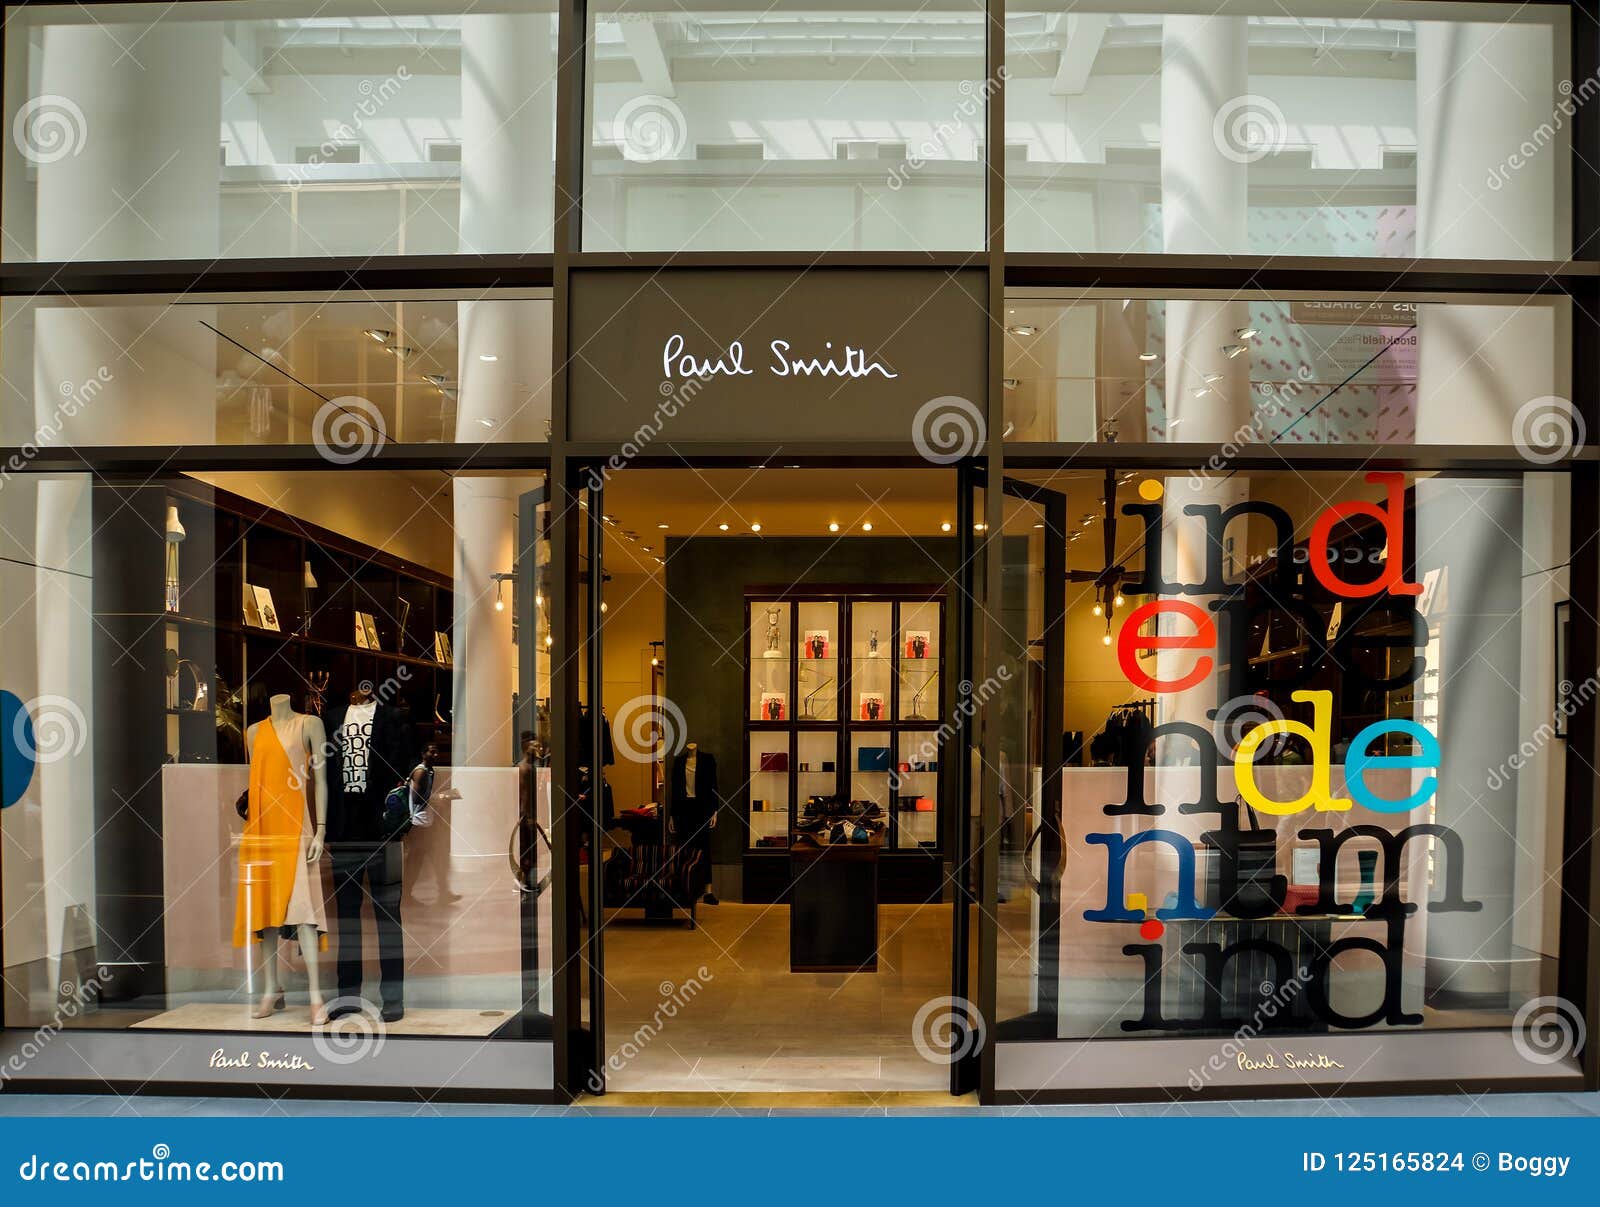 Paul Smith store editorial stock image. Image of front - 125165824